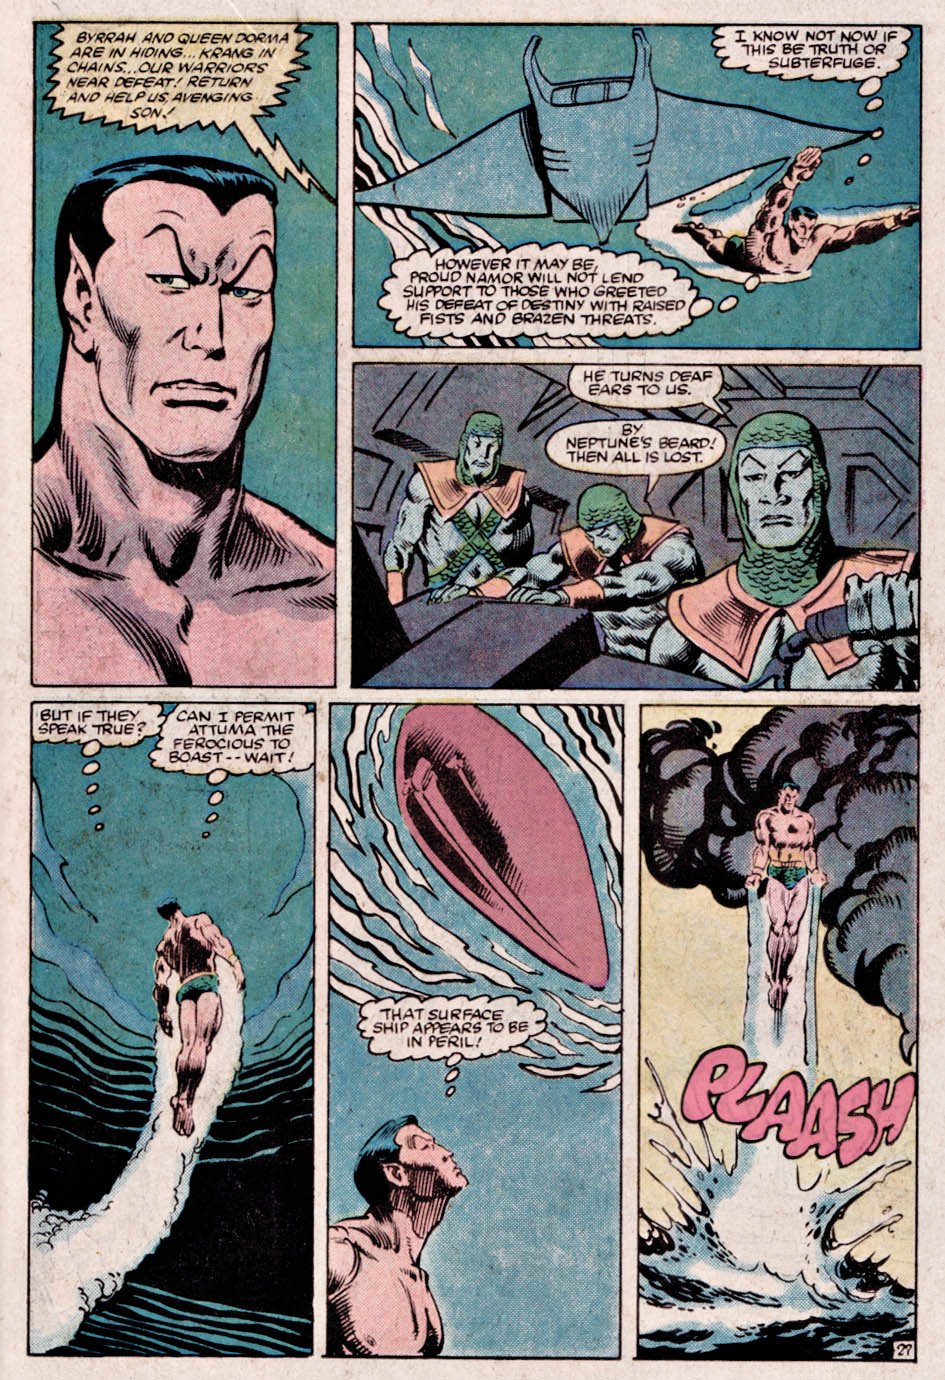 What If? (1977) issue 41 - The Sub-mariner had saved Atlantis from its destiny - Page 27